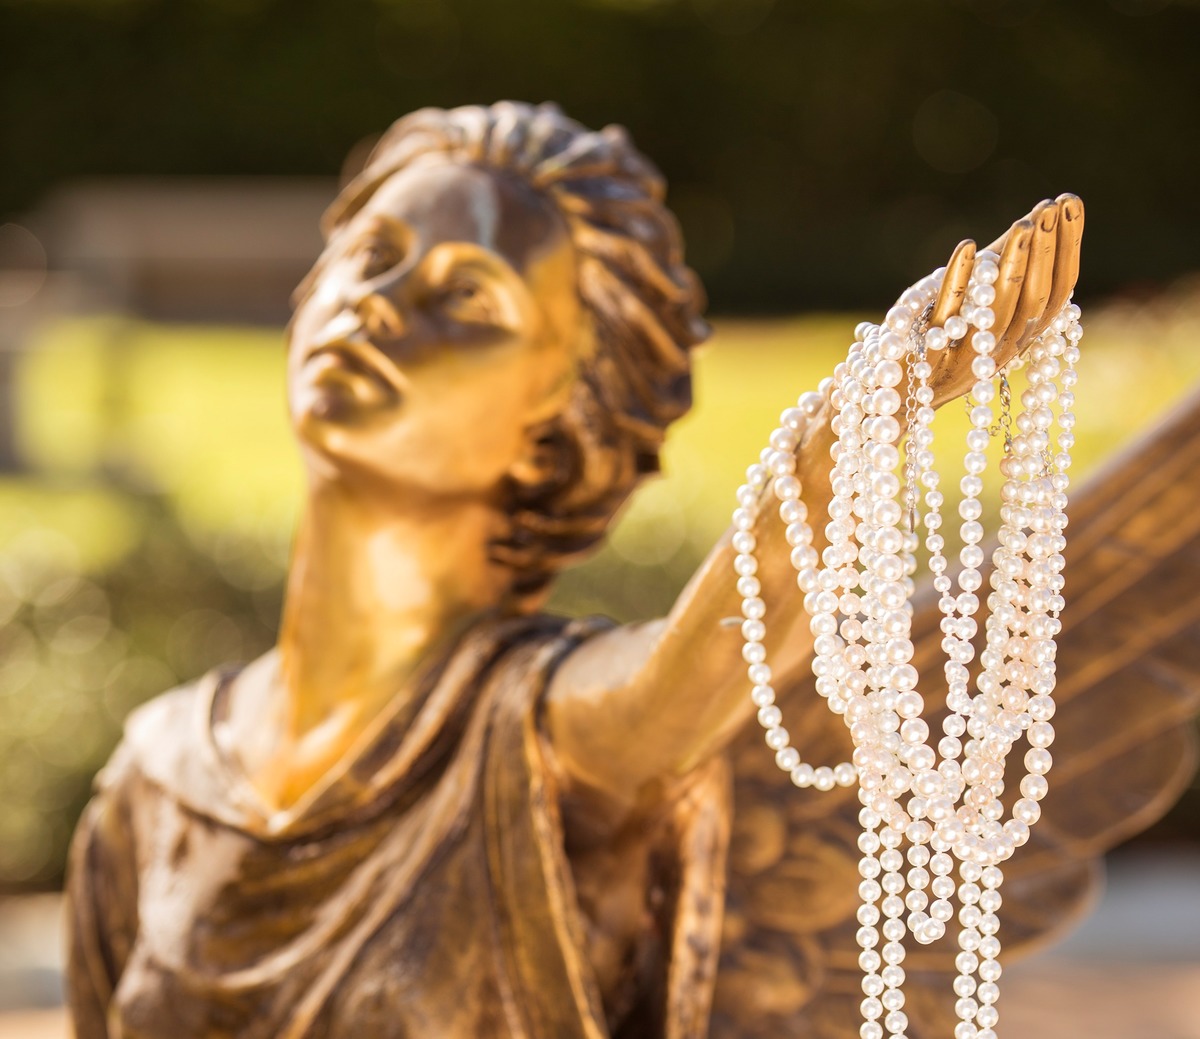 Bronze winged angel statue holding a string of pearls.